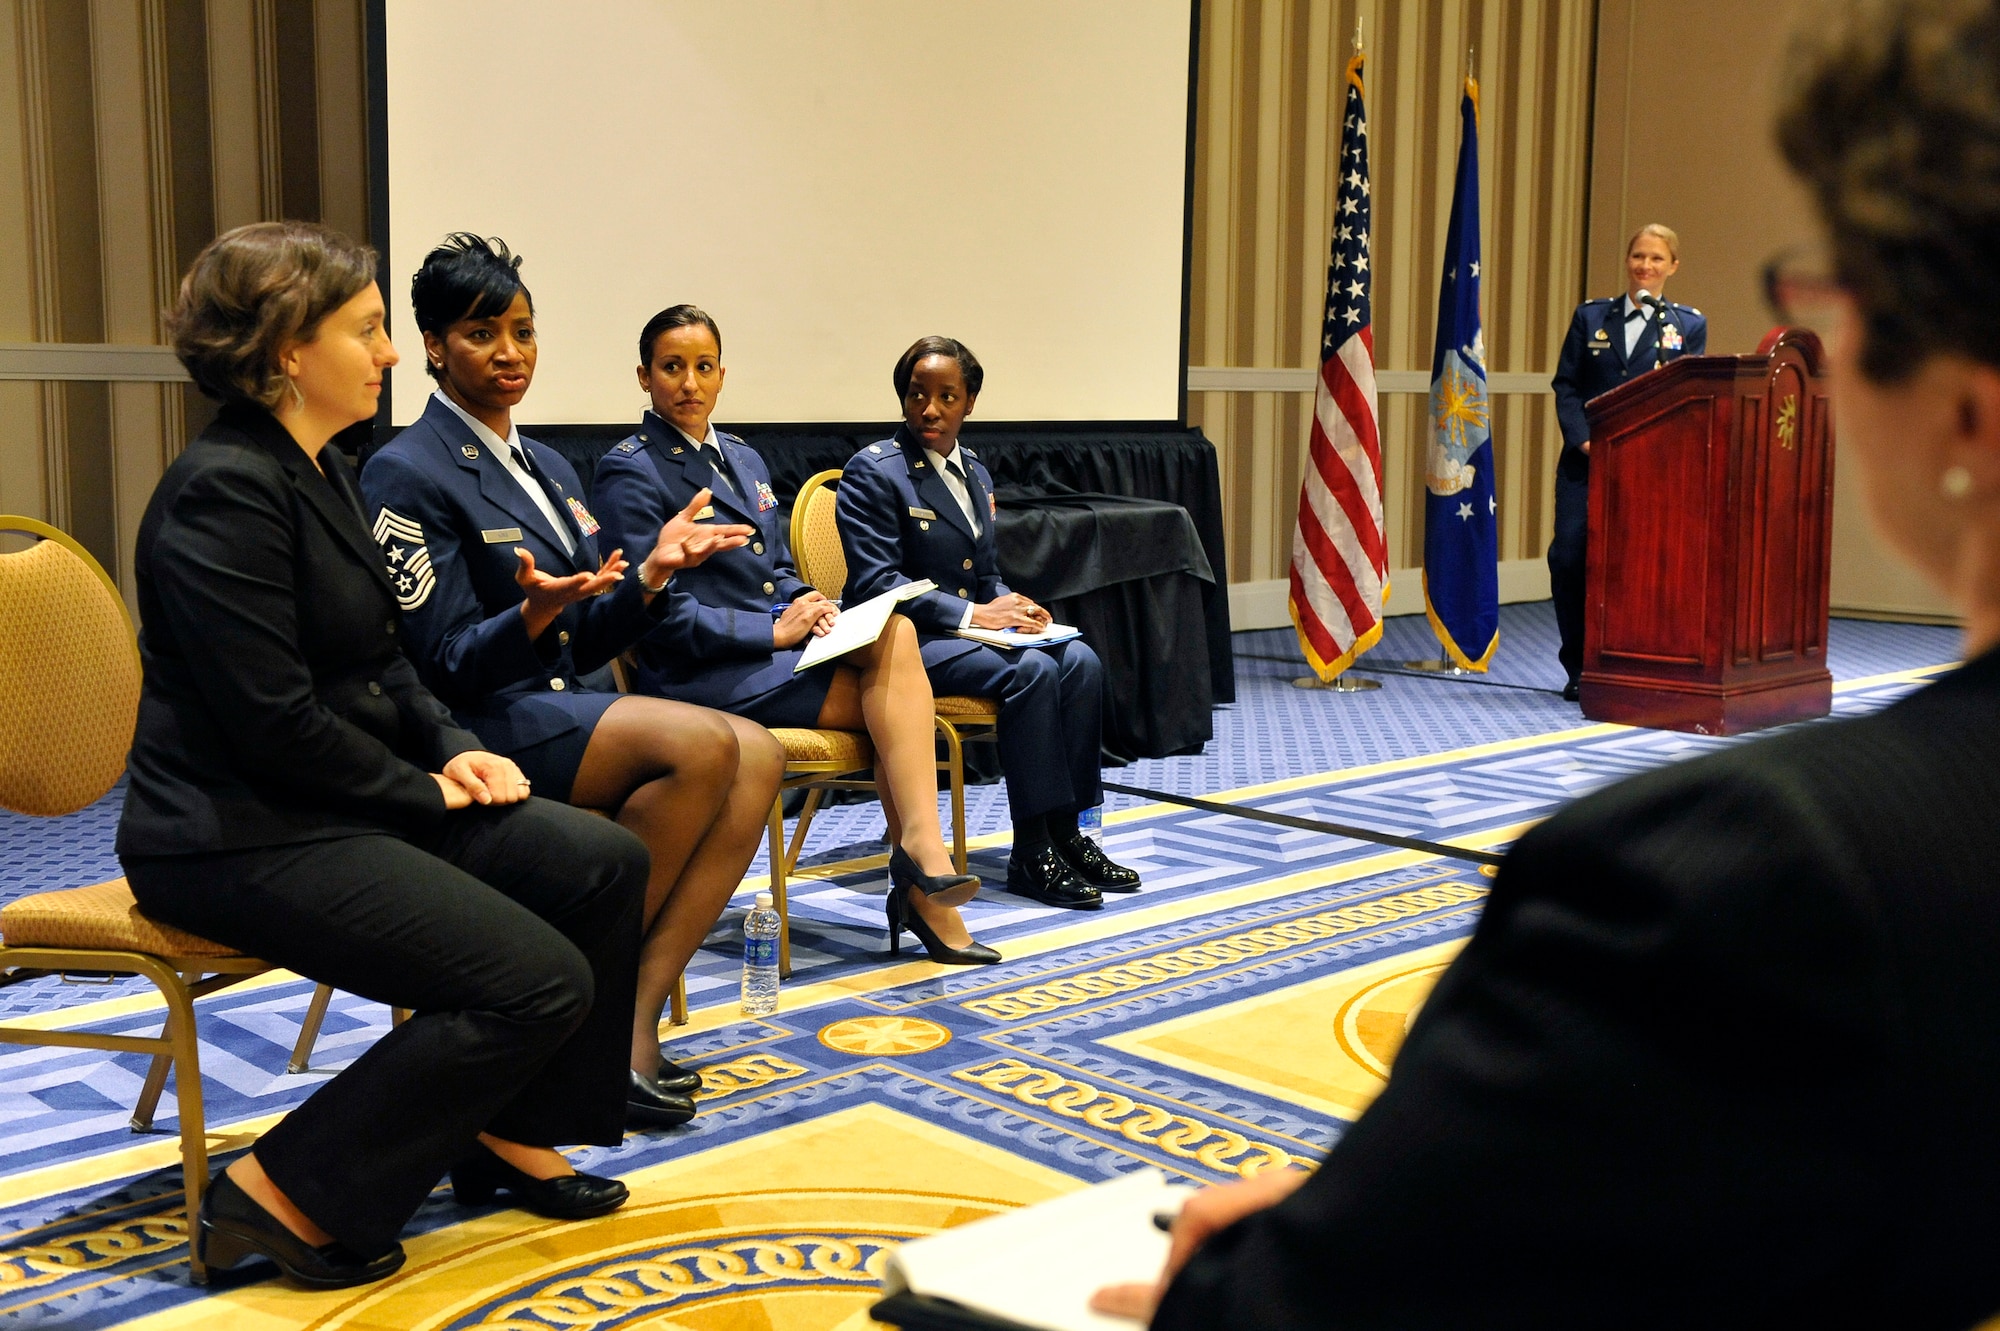 )Lt. Col. Tiaa Henderson, (left to right)  Capt. Amanda Mason, Chief Master Sgt. Trae King and Gail Lee participated in an Air Force panel discussion on why women are leaving the Air Force during the 2013 Joint Women's Leadership Symposium held in National Harbor, Md., June 7, 2013. (DoD photo/ Desiree N. Palacios)